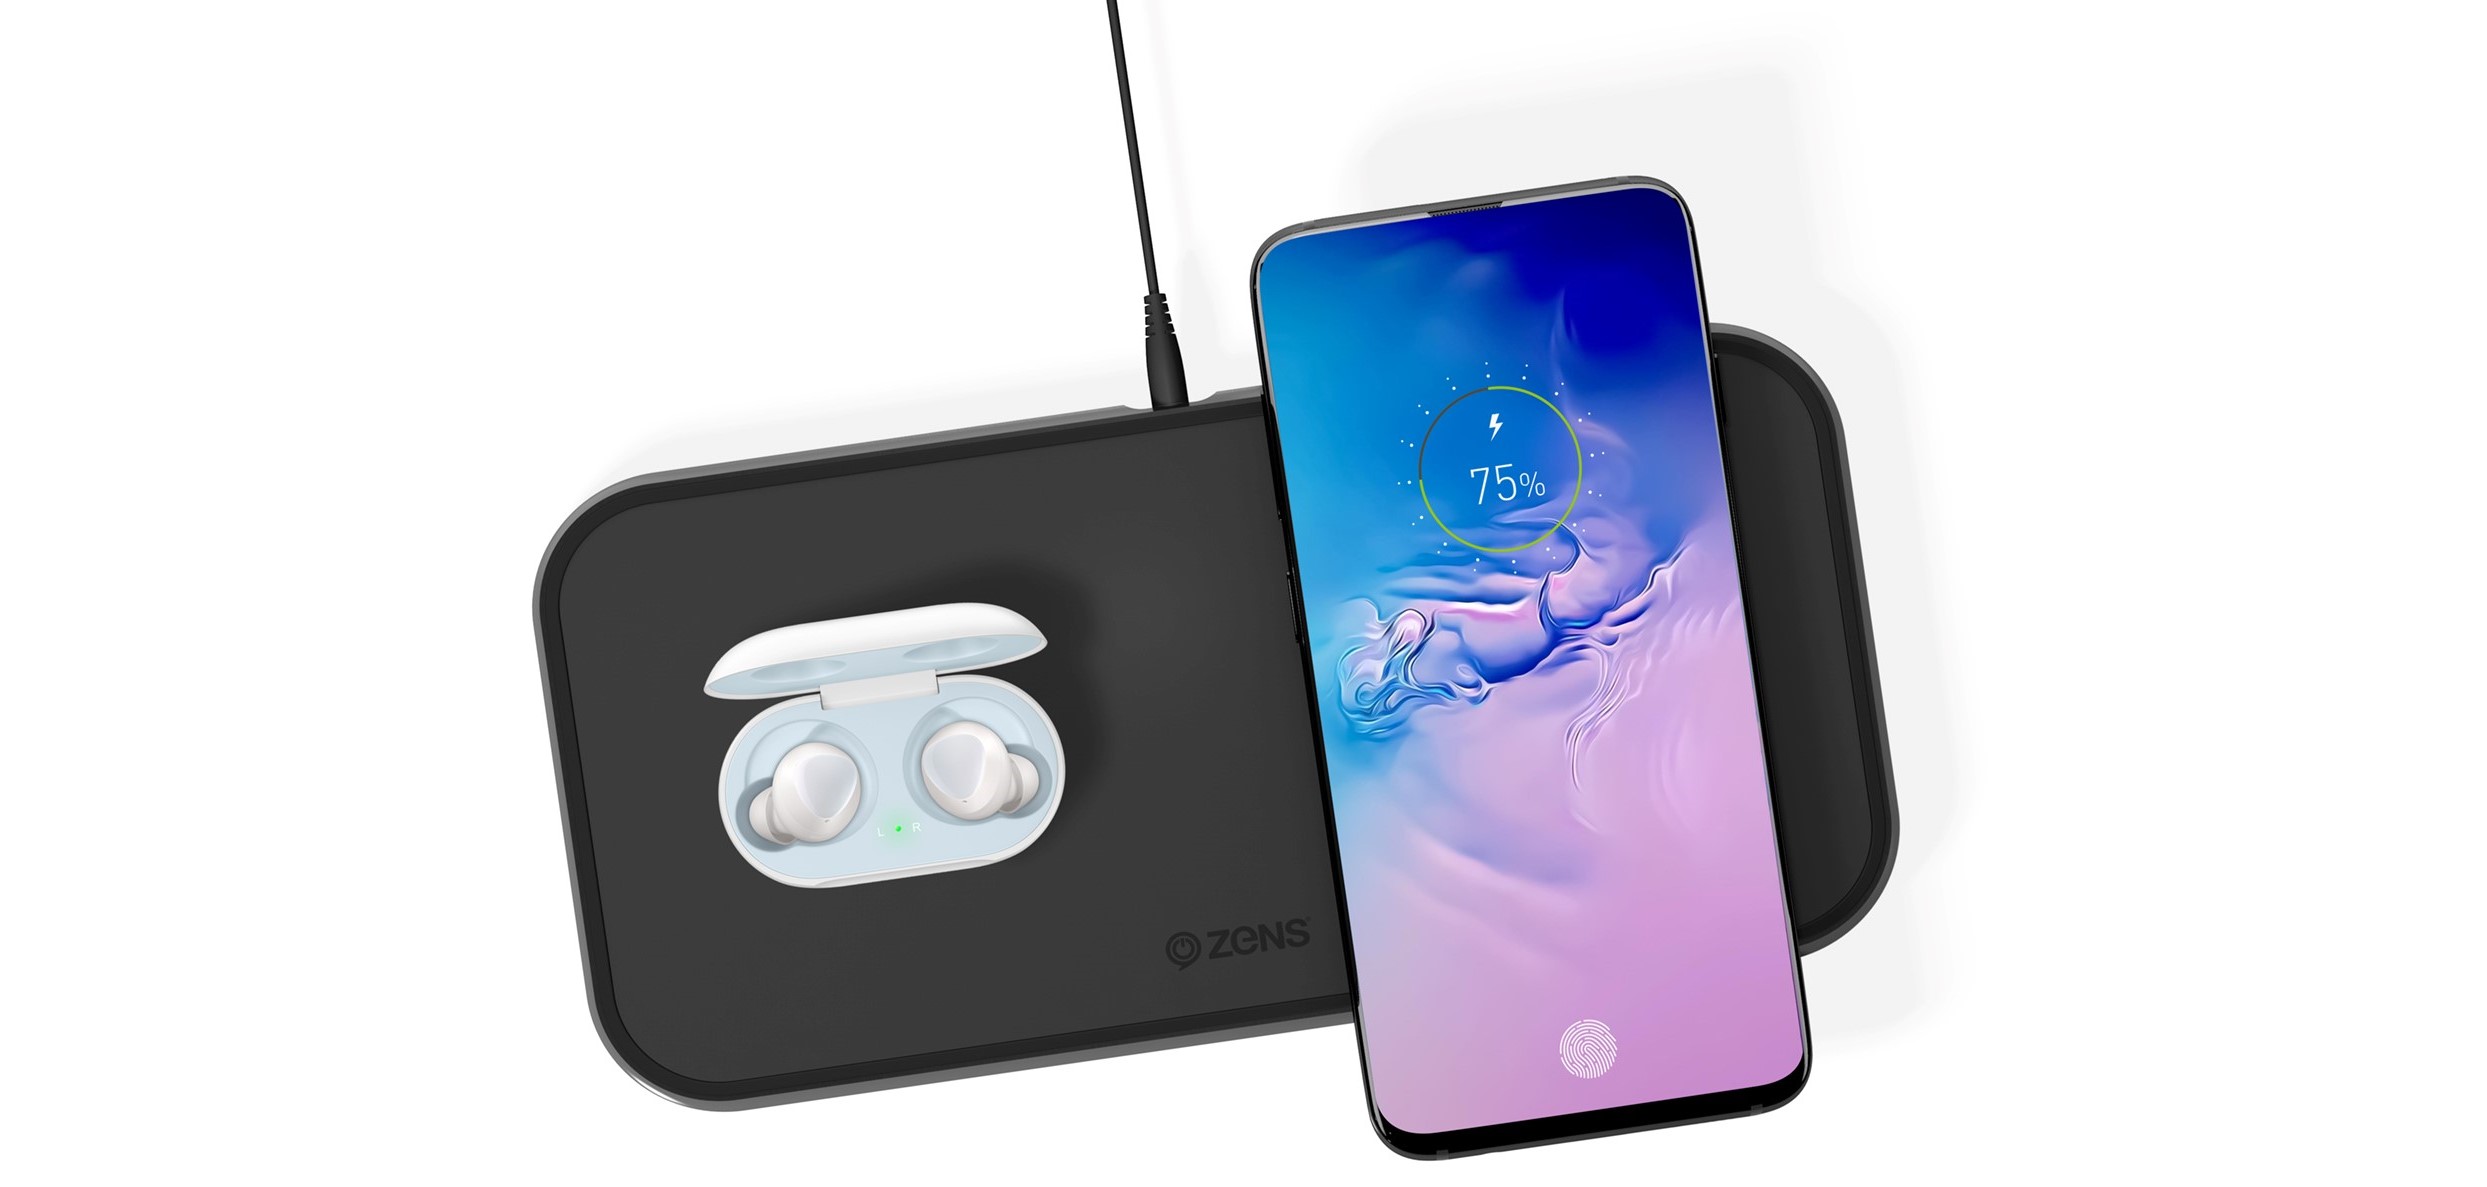 ZENS Dual Aluminium Wireless Charger while charging Samsung Galaxy S10 and Galaxy Buds